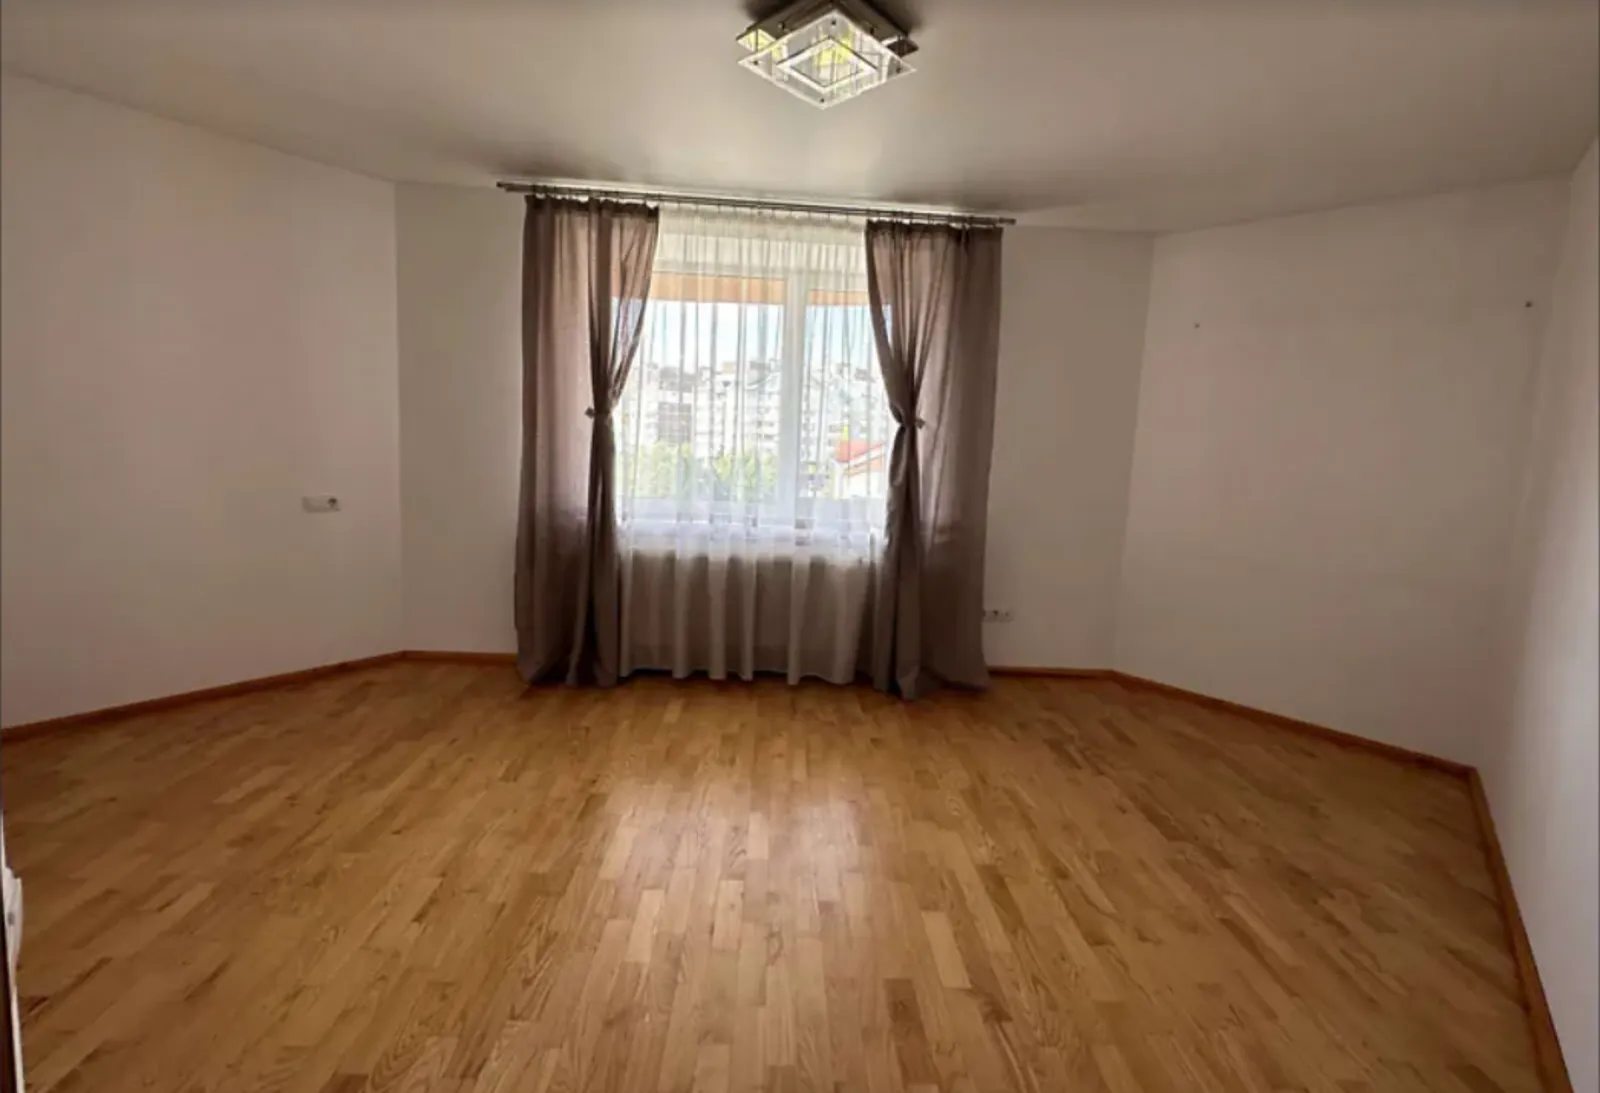 Apartment for rent. 2 rooms, 67 m², 6th floor/10 floors. Alyaska, Ternopil. 